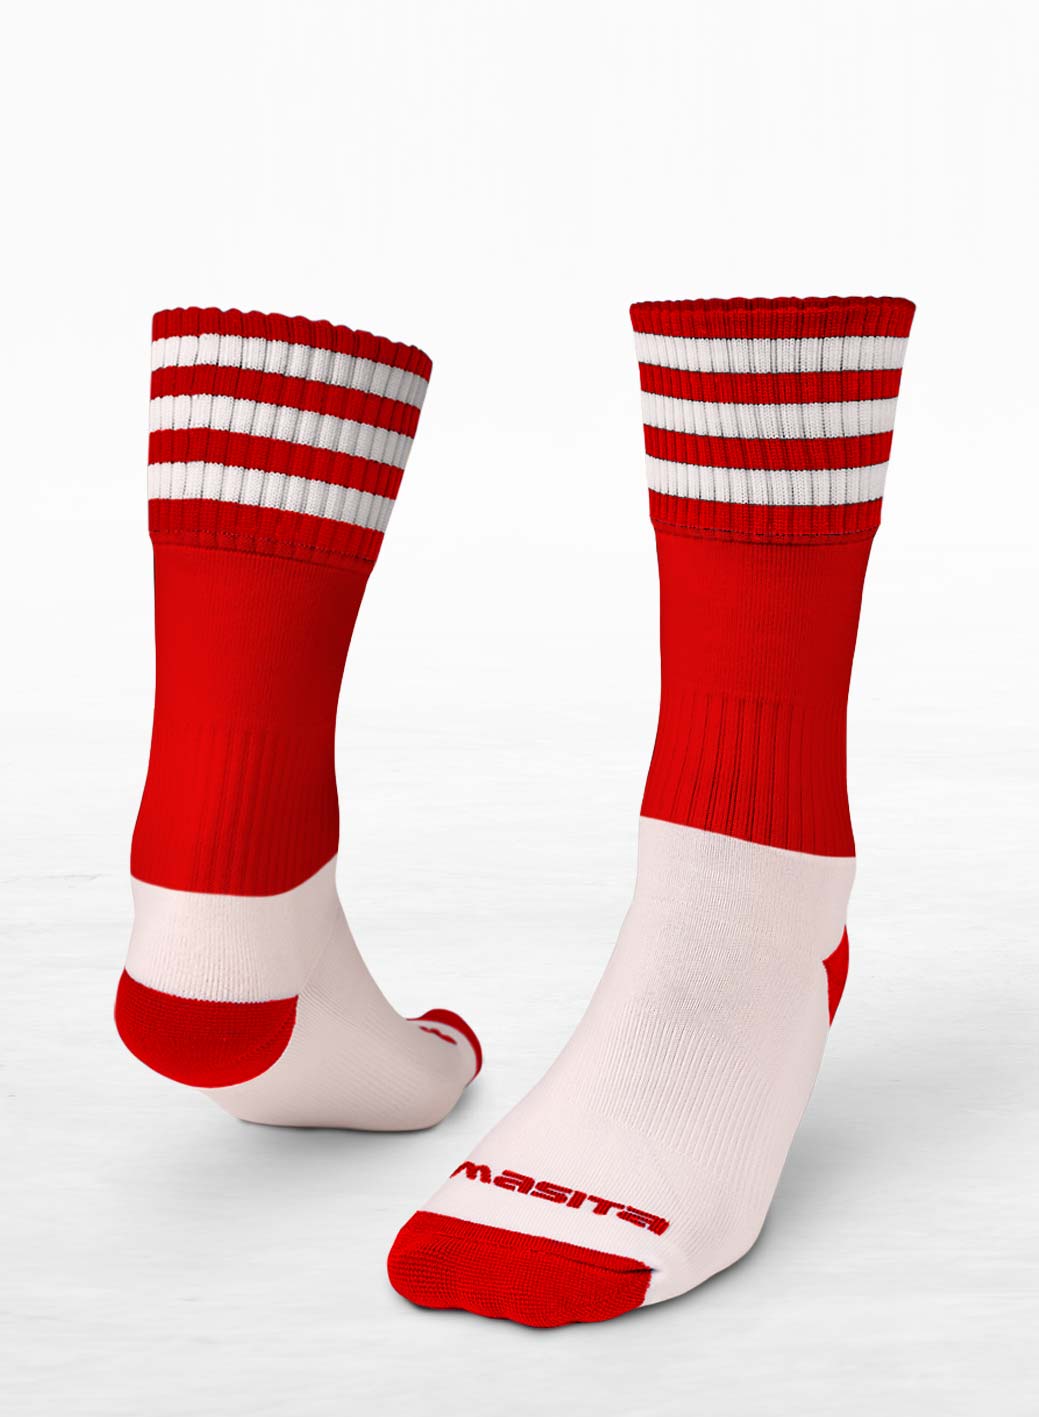 Red and White Striped Adult Socks